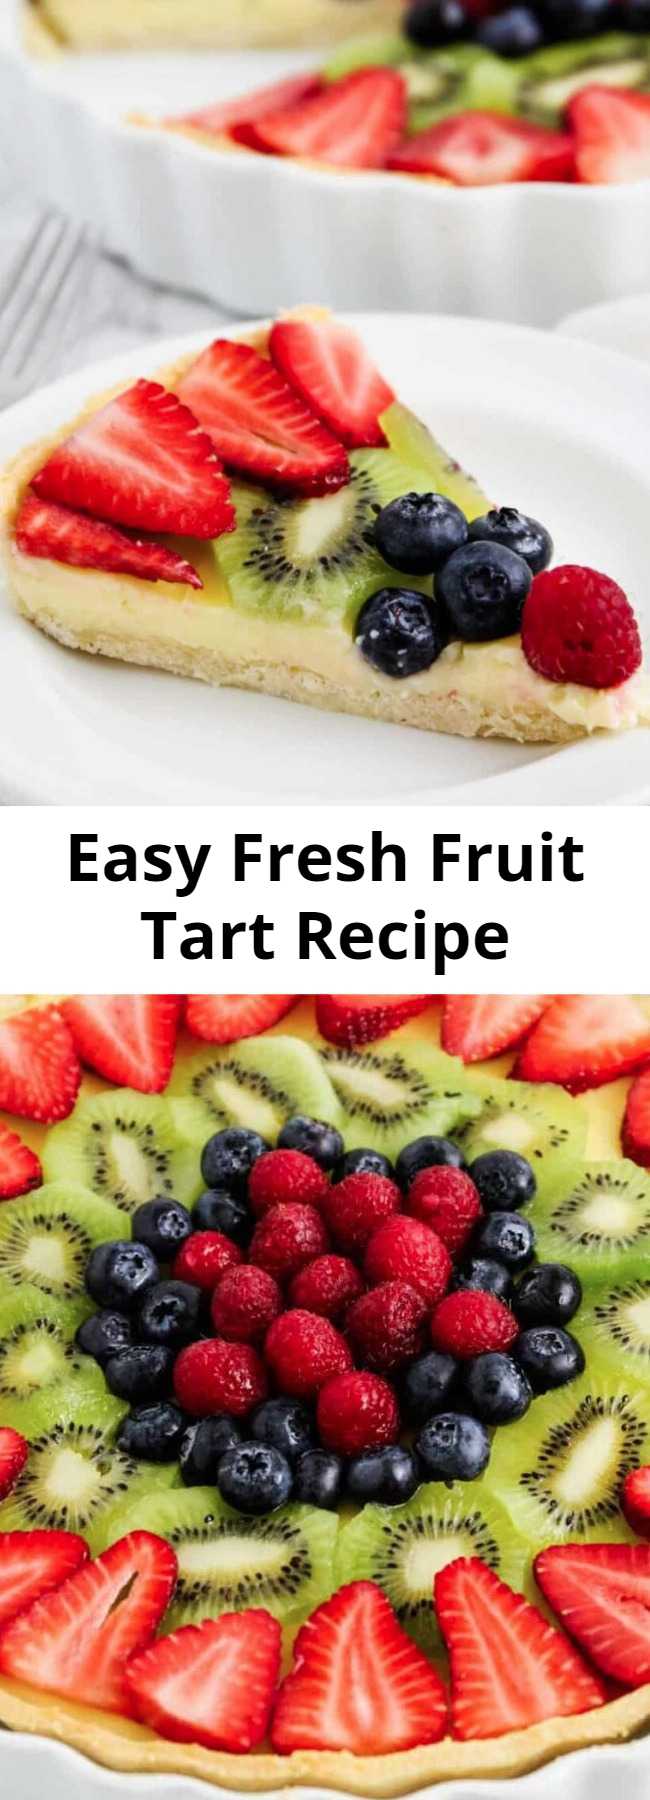 Easy Fresh Fruit Tart Recipe - Each bite of this fresh fruit tart is a mix of crumbly sweet crust, smooth and decadent custard and juicy fresh berries! This fruit tart recipe is the perfect refreshing treat for warmer weather! #fruittart #easy #recipe #crust #custard #filling #mini #berry #dessert